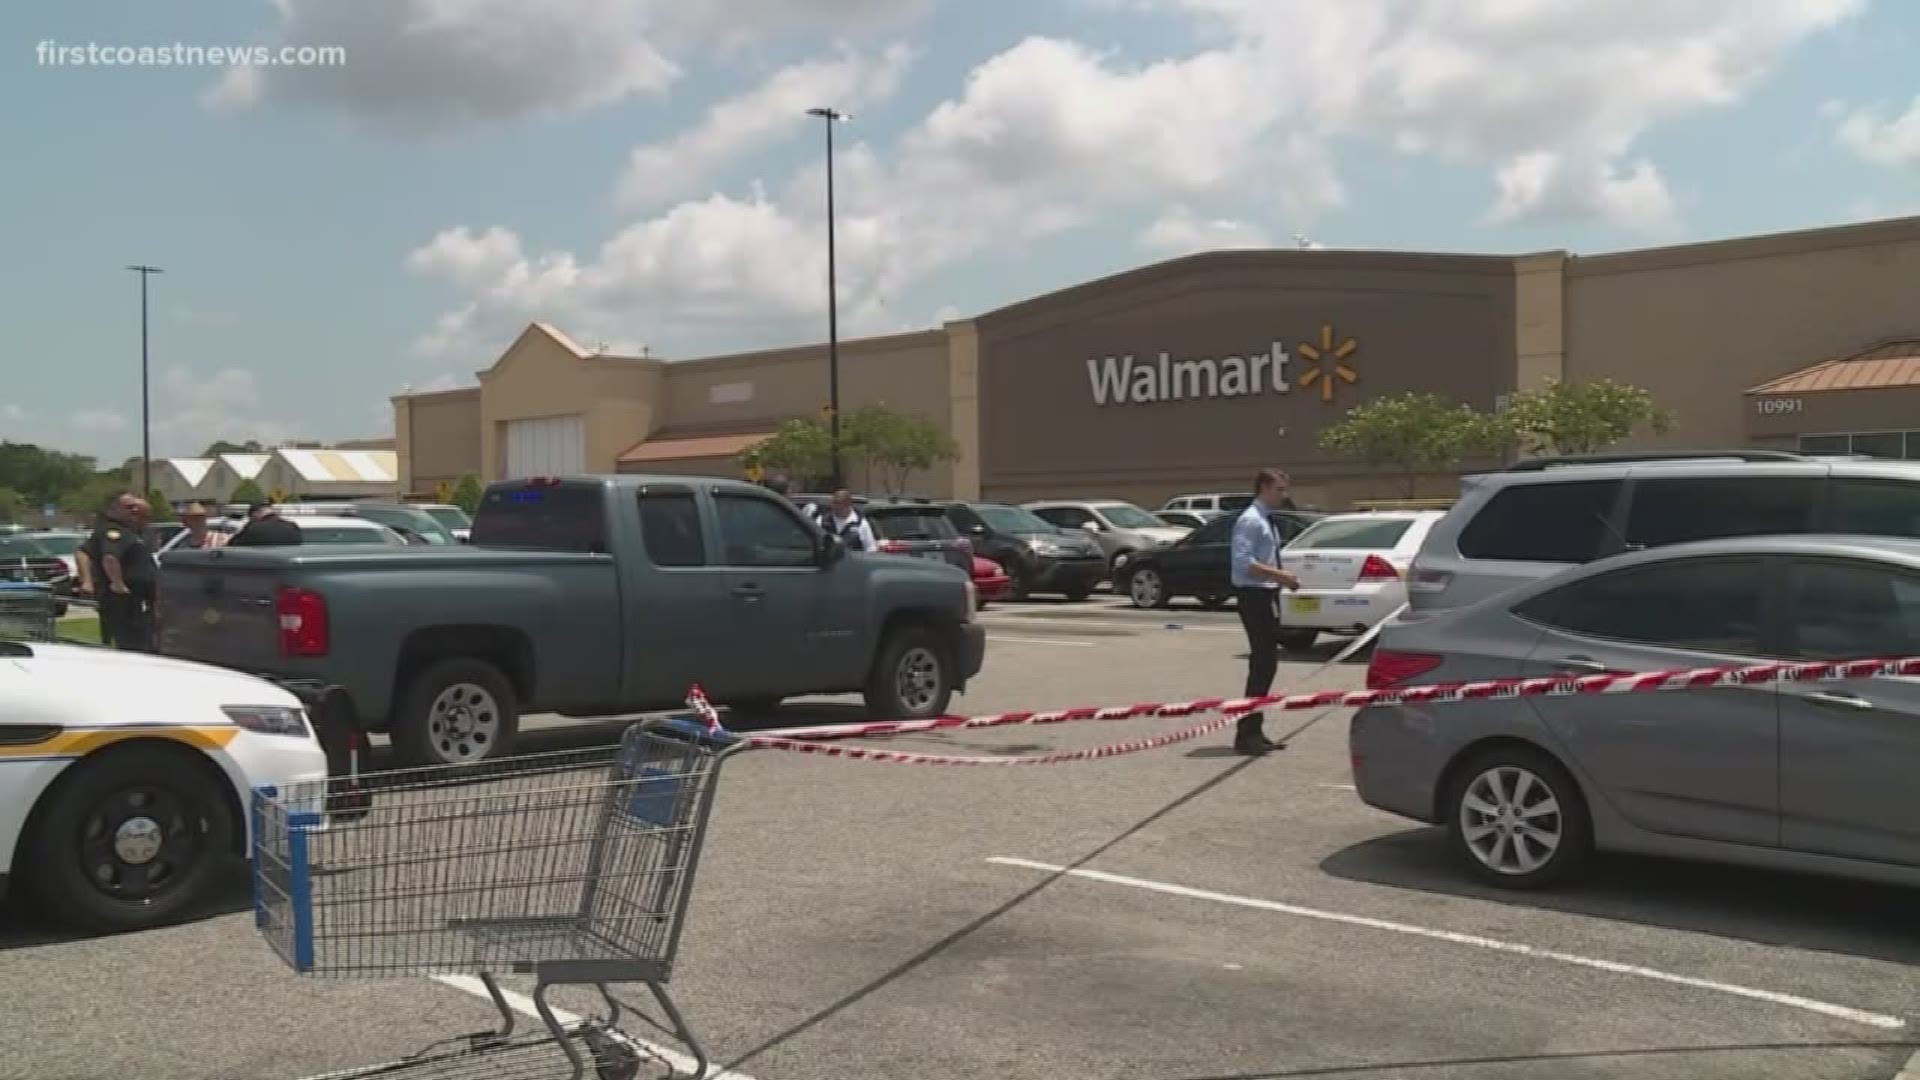 A pedestrian is in serious condition after they were run over and pinned under a vehicle in a Walmart parking lot.